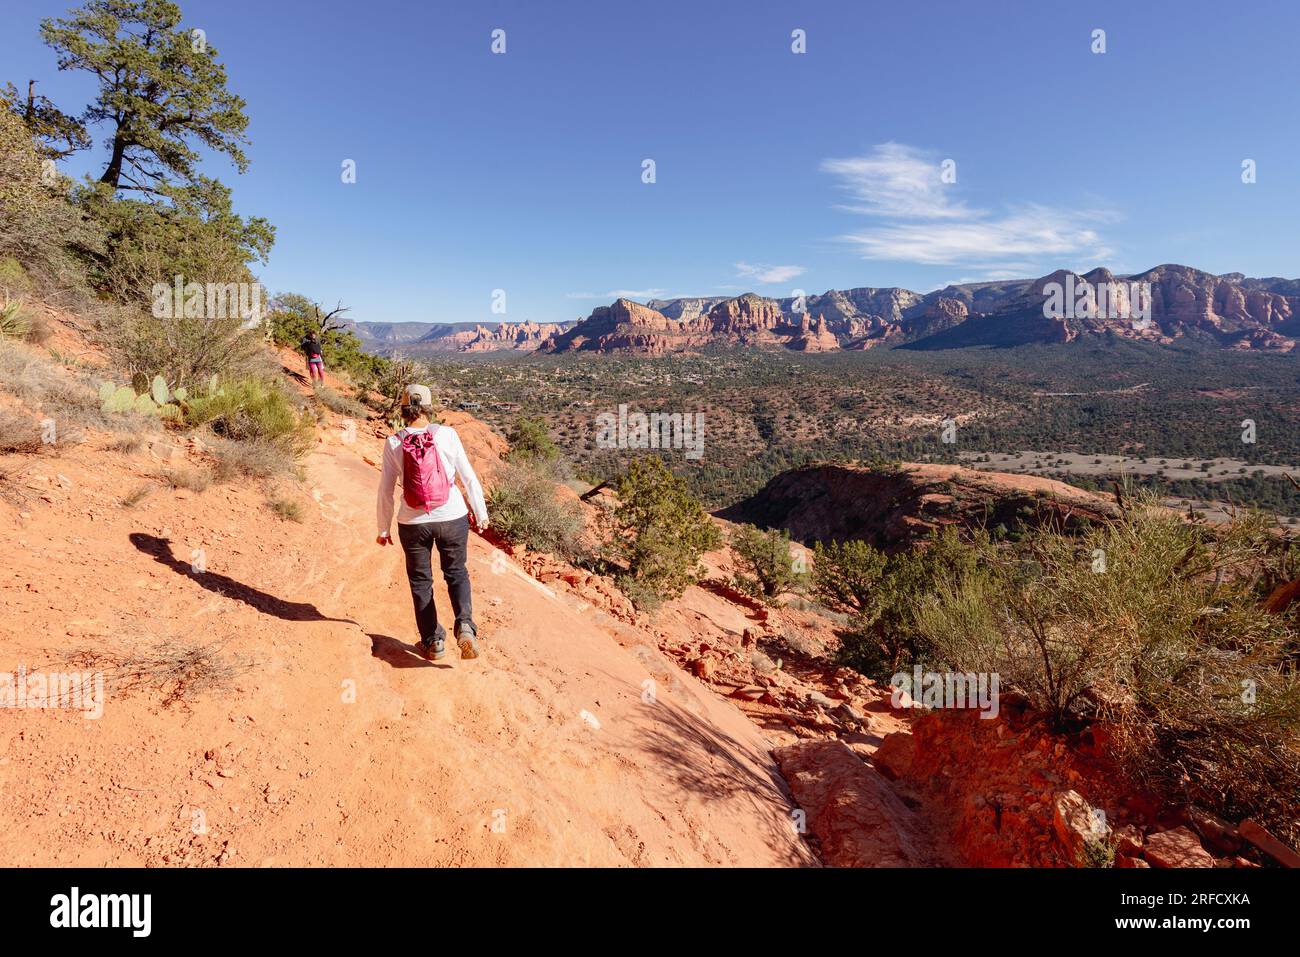 People enjoy a walk on the hiking trails in Red Rock state park in Arizona USA Stock Photo